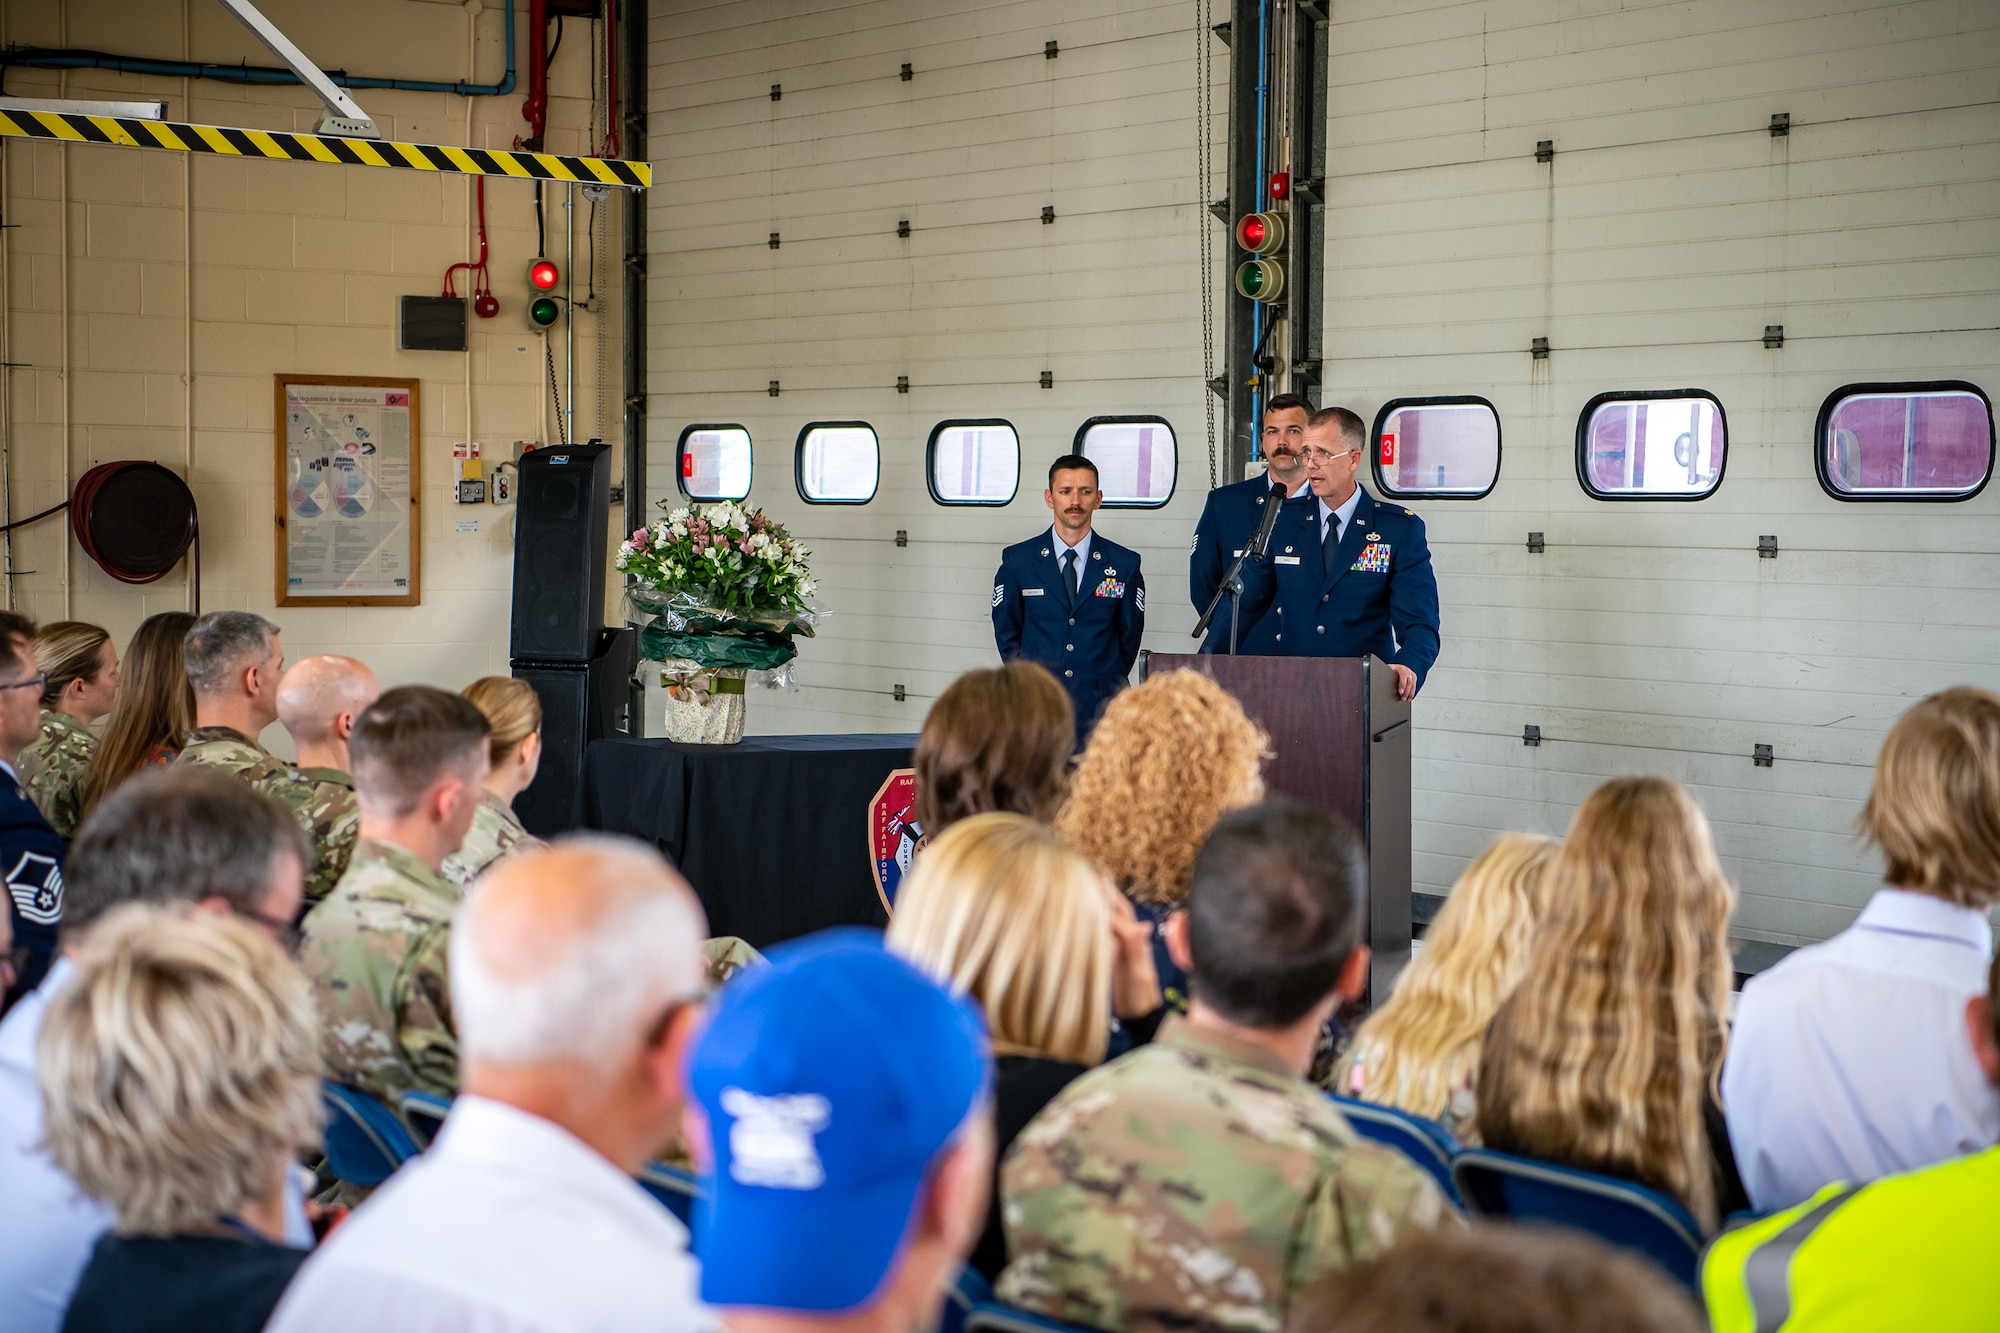 U.S. Air Force Kirk Hull, 422d Civil Engineer Squadron commander, speaks during a change of command ceremony at RAF Croughton, England, June 15, 2023. Prior to assuming command, Hull served as the commander of the Programs and Evaluations Flight at the 554th RED HORSE Squadron, Andersen AFB, Guam. (U.S. Air Force photo by Staff Sgt. Eugene Oliver)